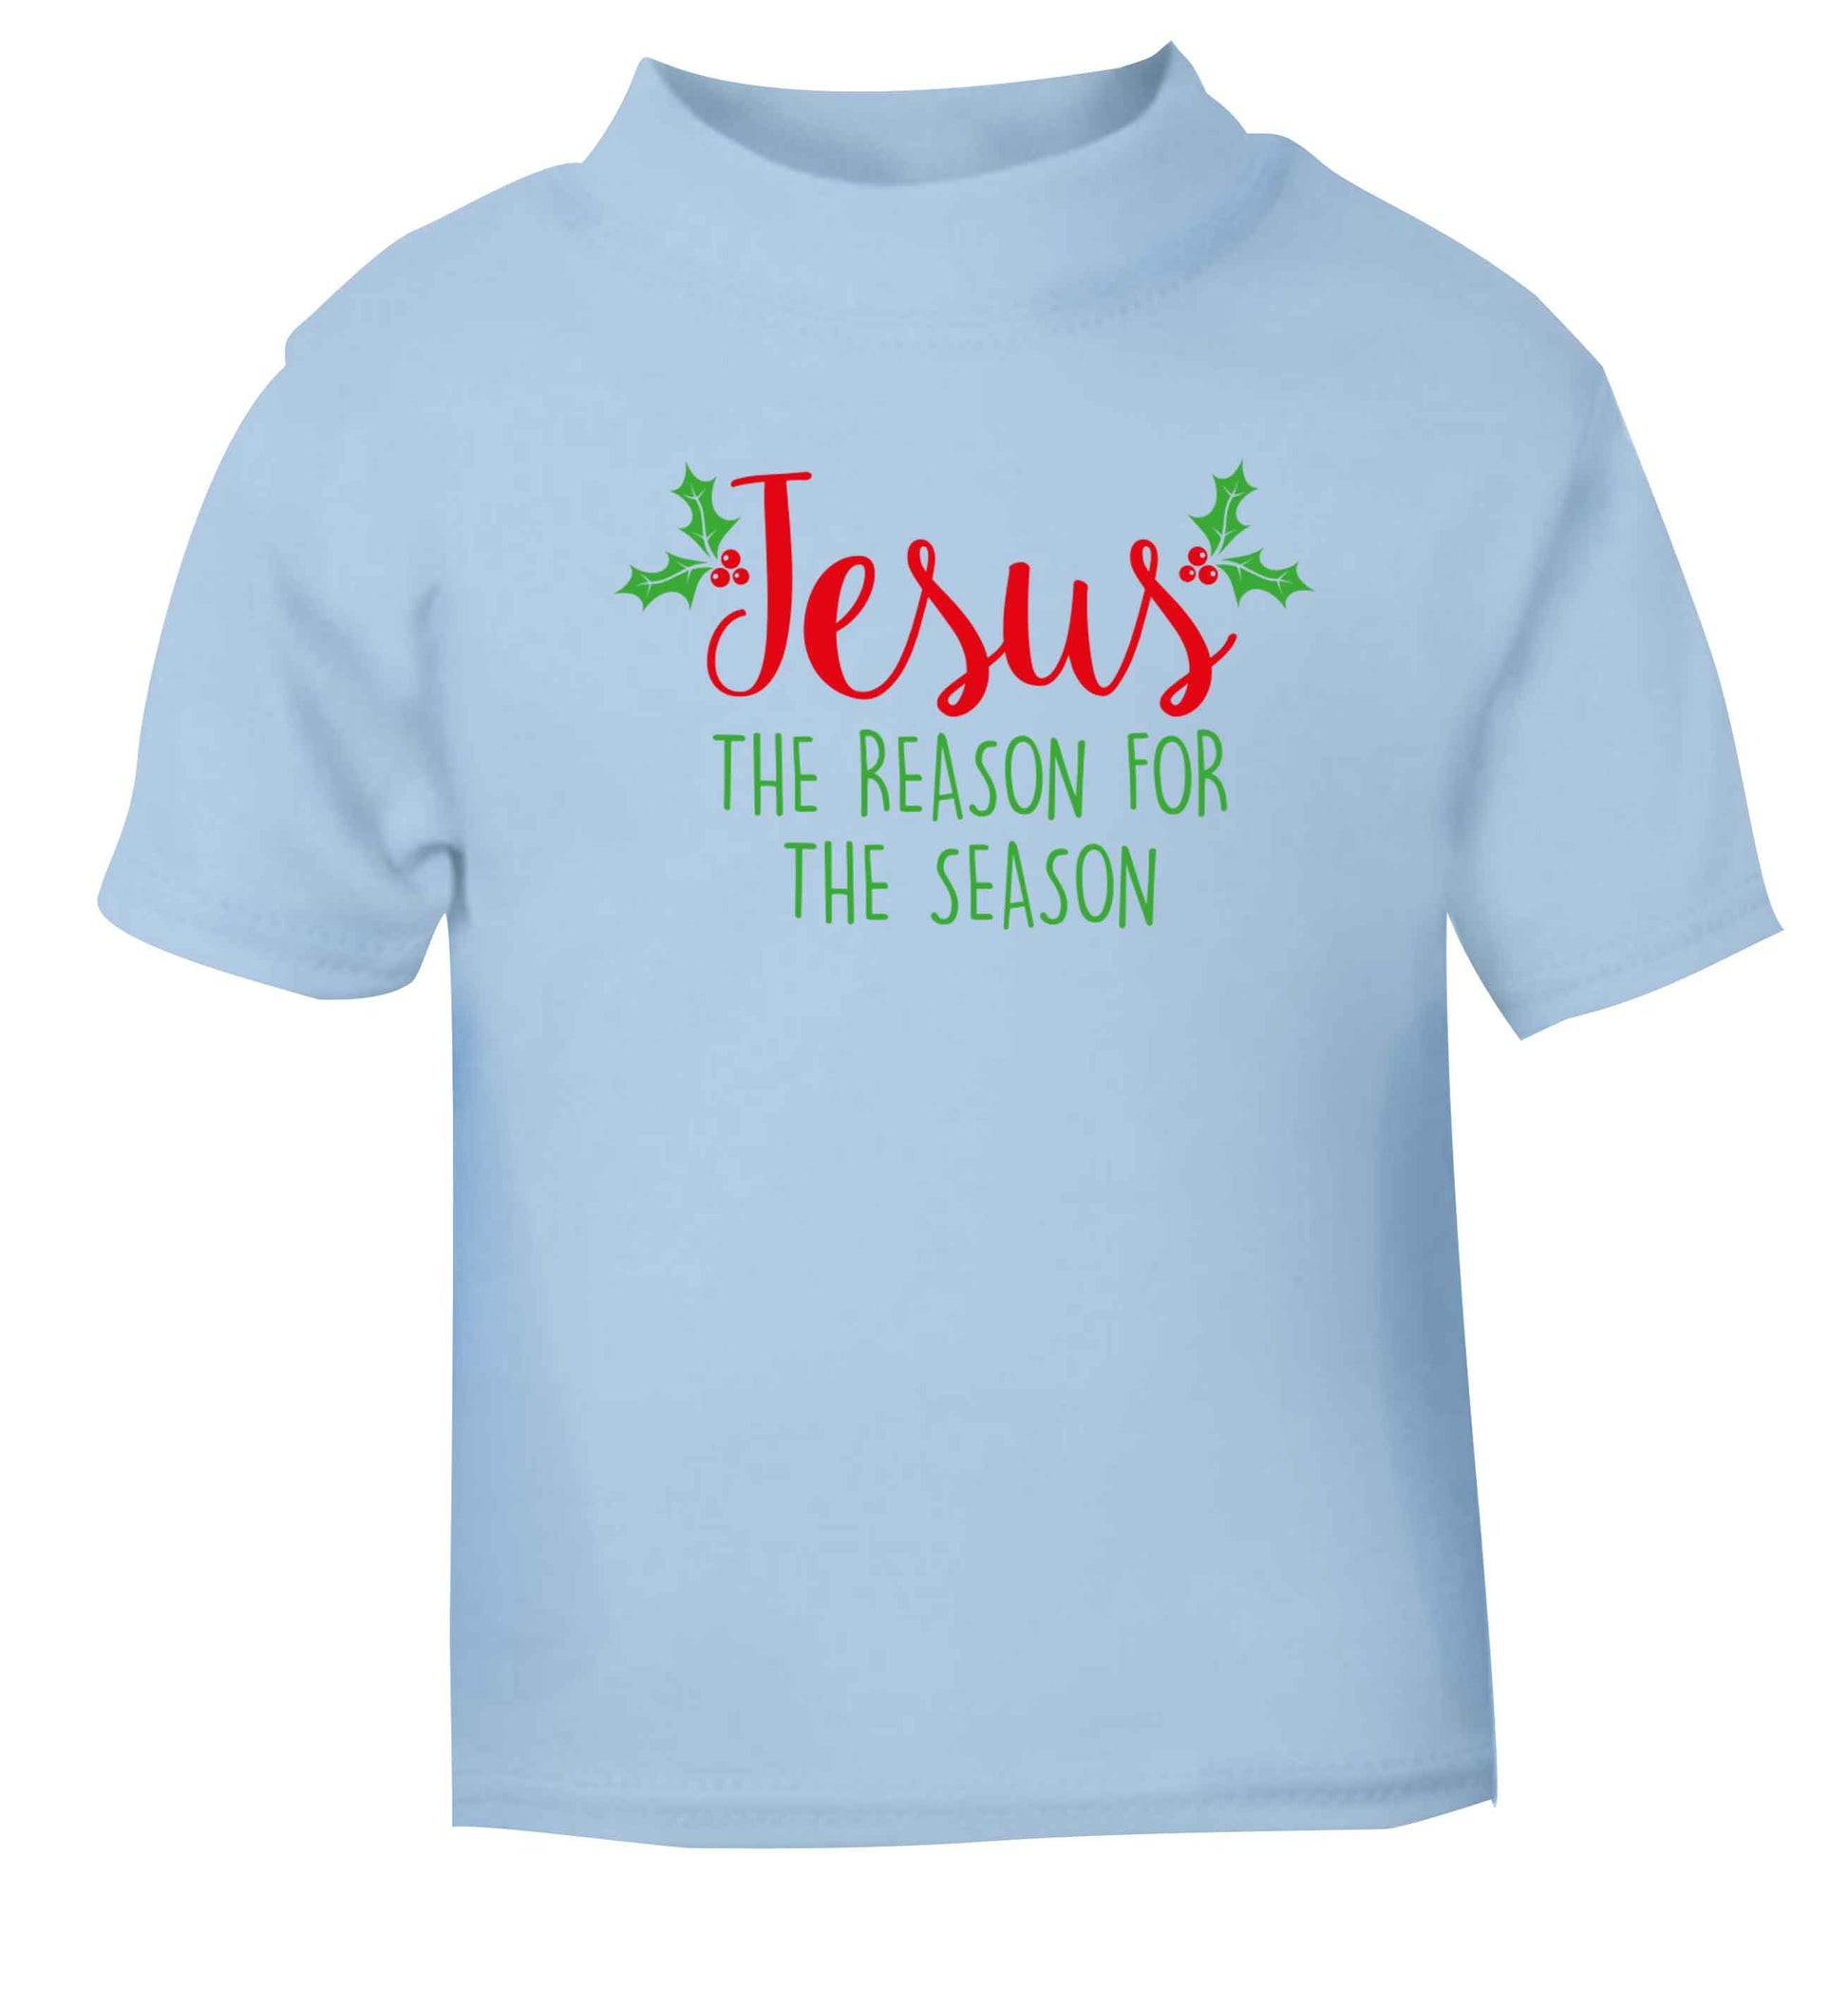 Jesus the reason for the season light blue baby toddler Tshirt 2 Years